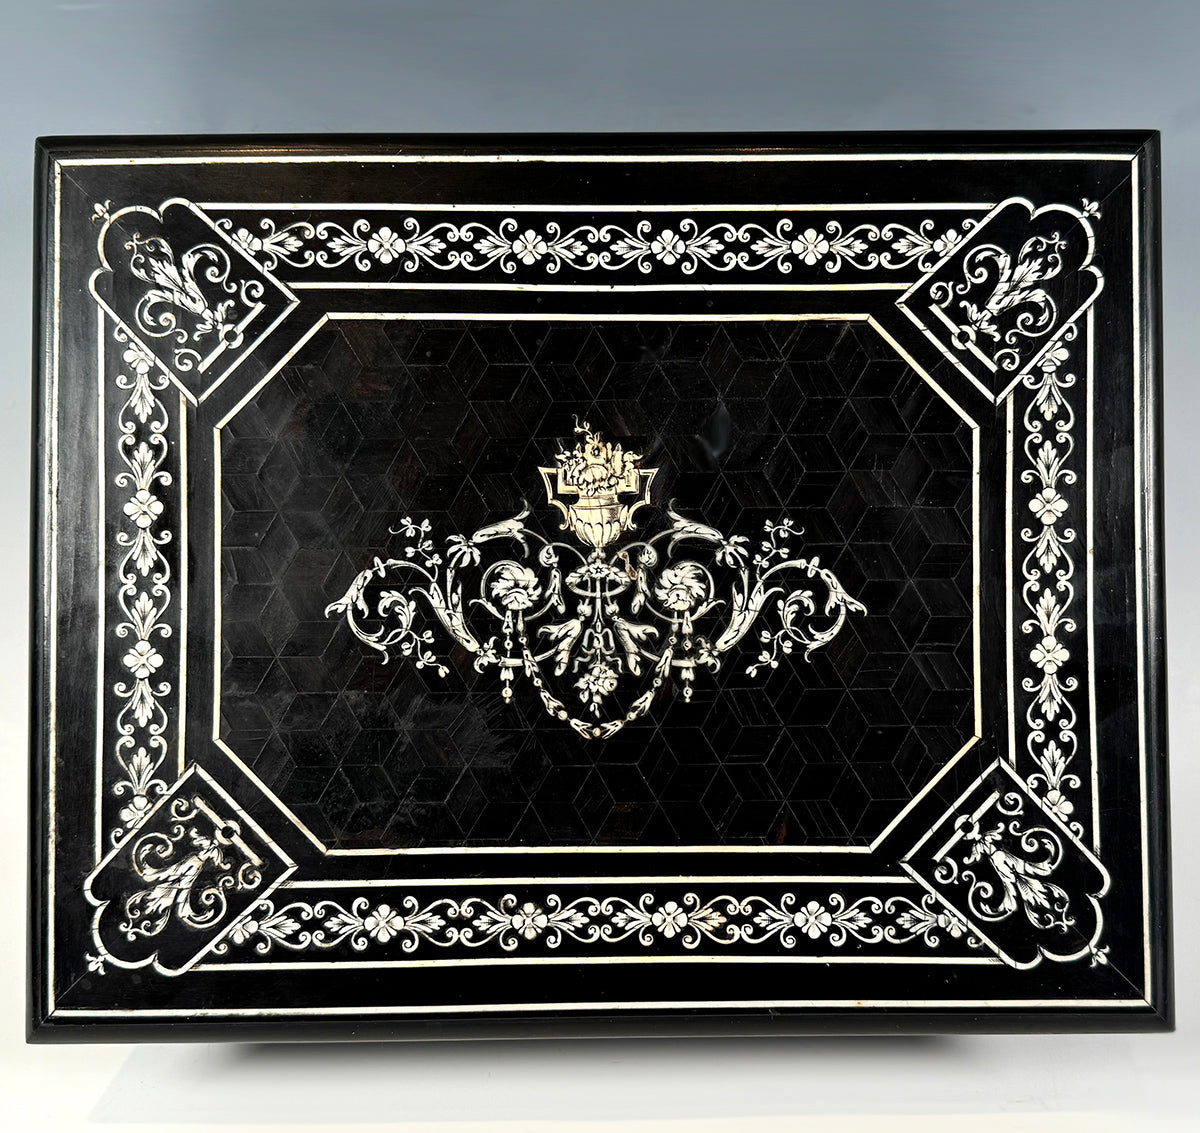 Rare Antique DEIHL, Paris, French Game Box or Chest, Parquet of Ebony w Marquetry in Ivory, c.1840